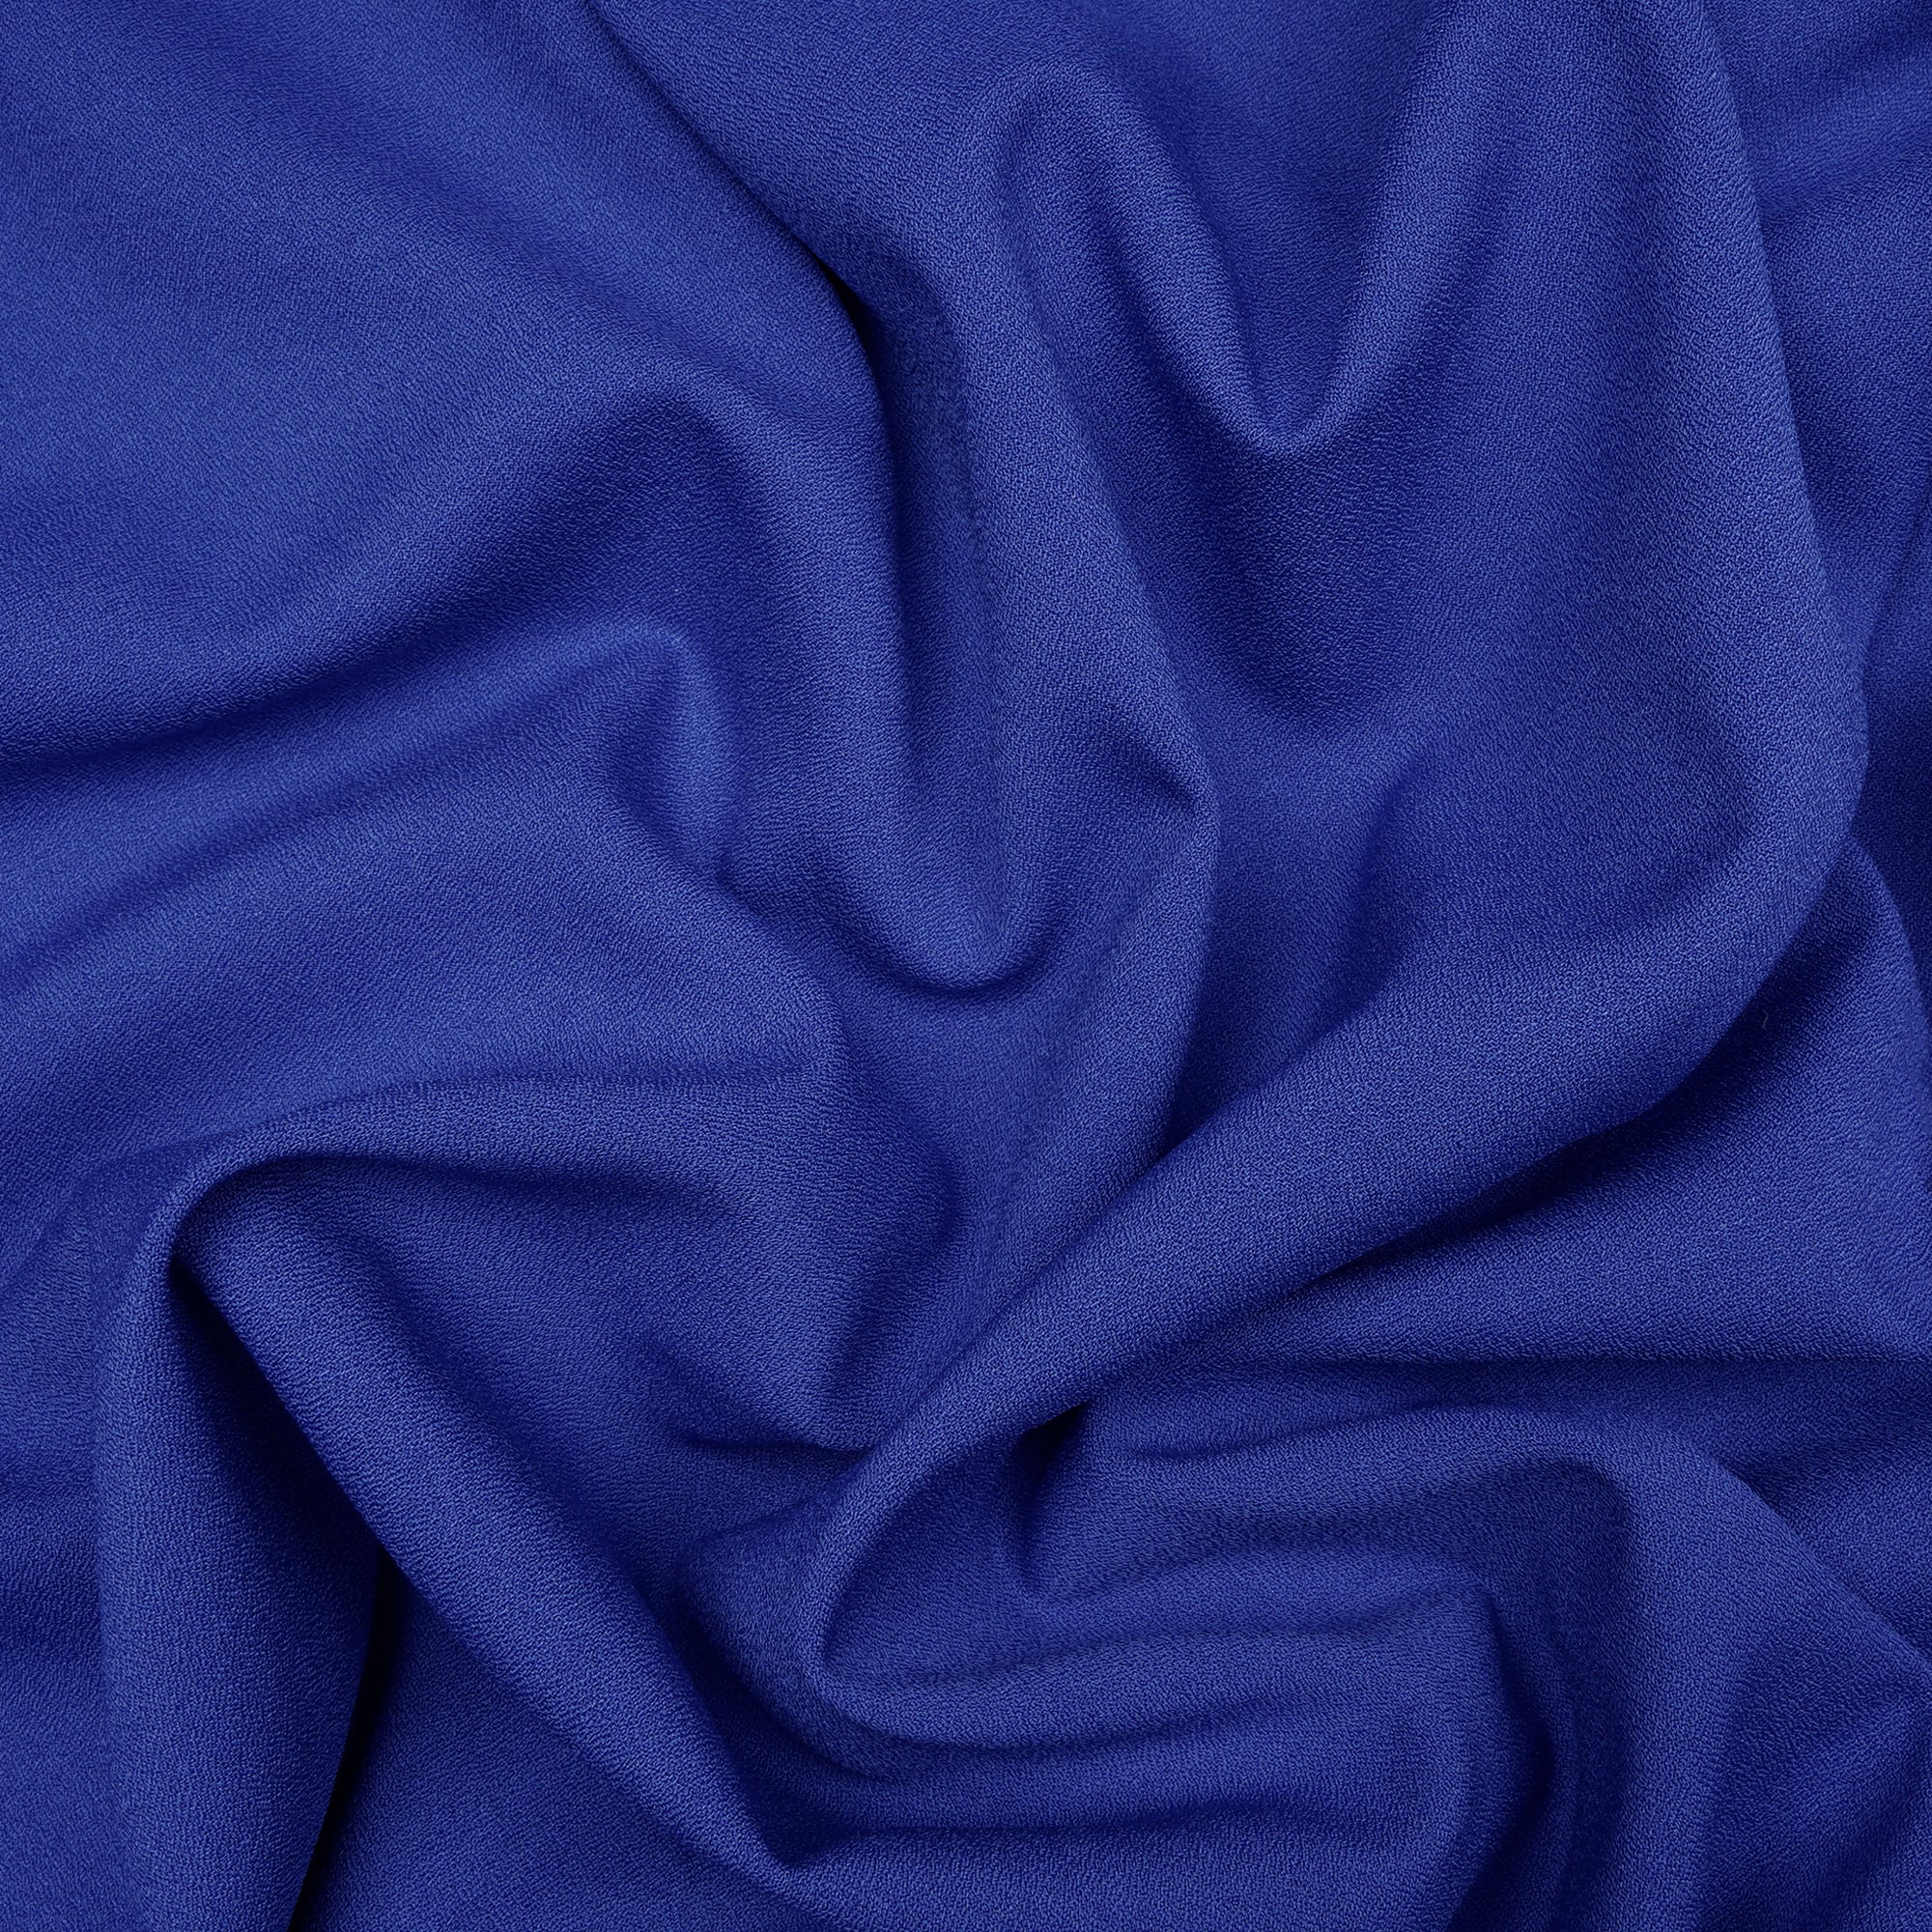 Galaxy Blue Solid Dyed Imported Moss Crepe Fabric (60" Width)